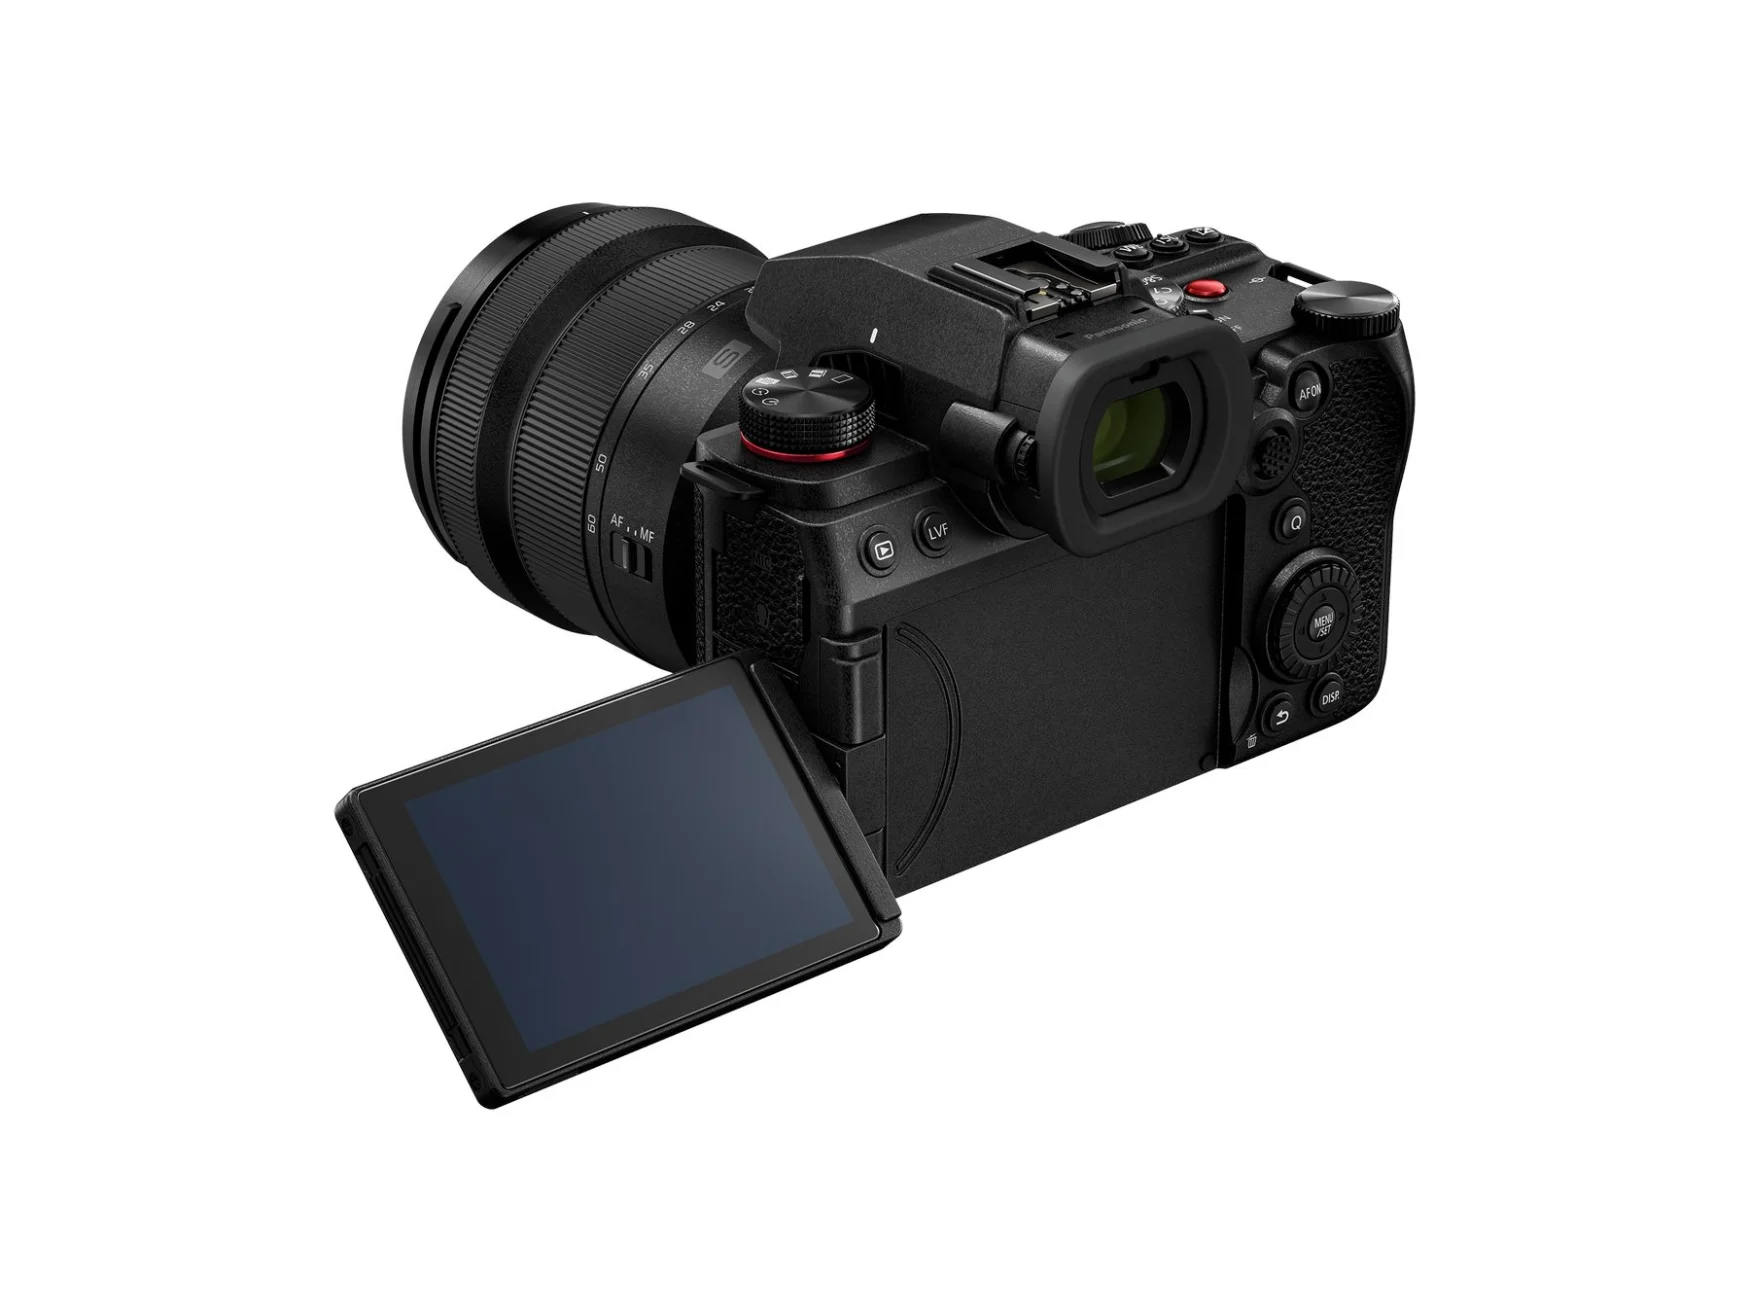 Panasonic launches its first hybrid AF mirrorless cameras, the S5II and S5IIx